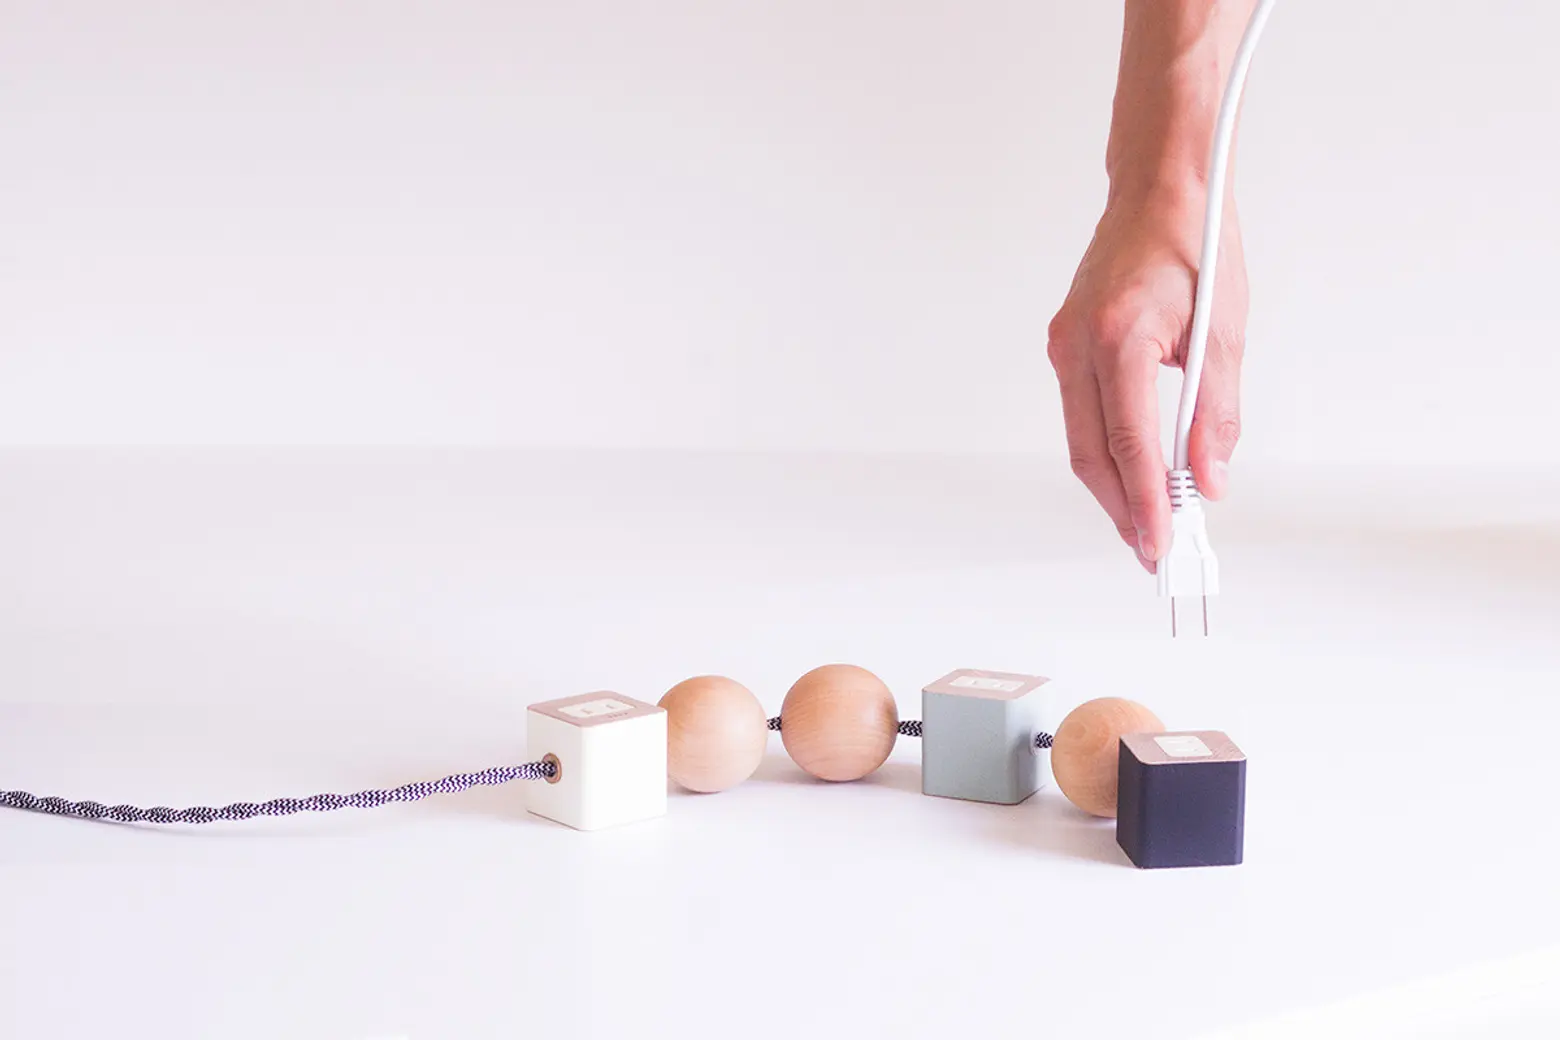 OKUM’s oon Power Outlet Makes the Boring Extension Cord Fun